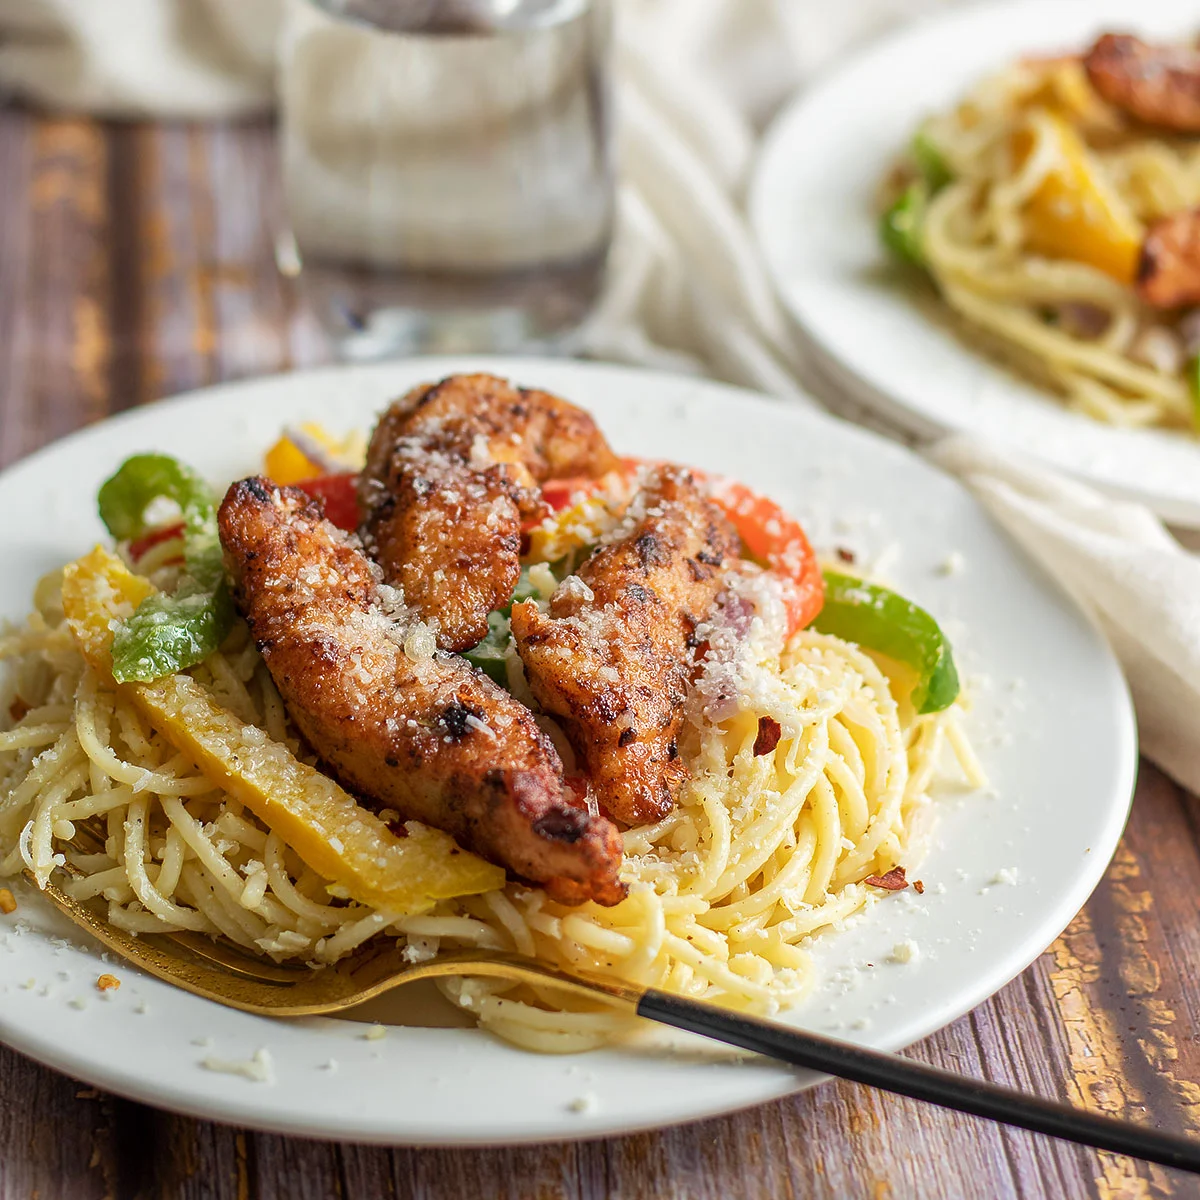 A plate of spaghetti with tender chicken and peppers on it.